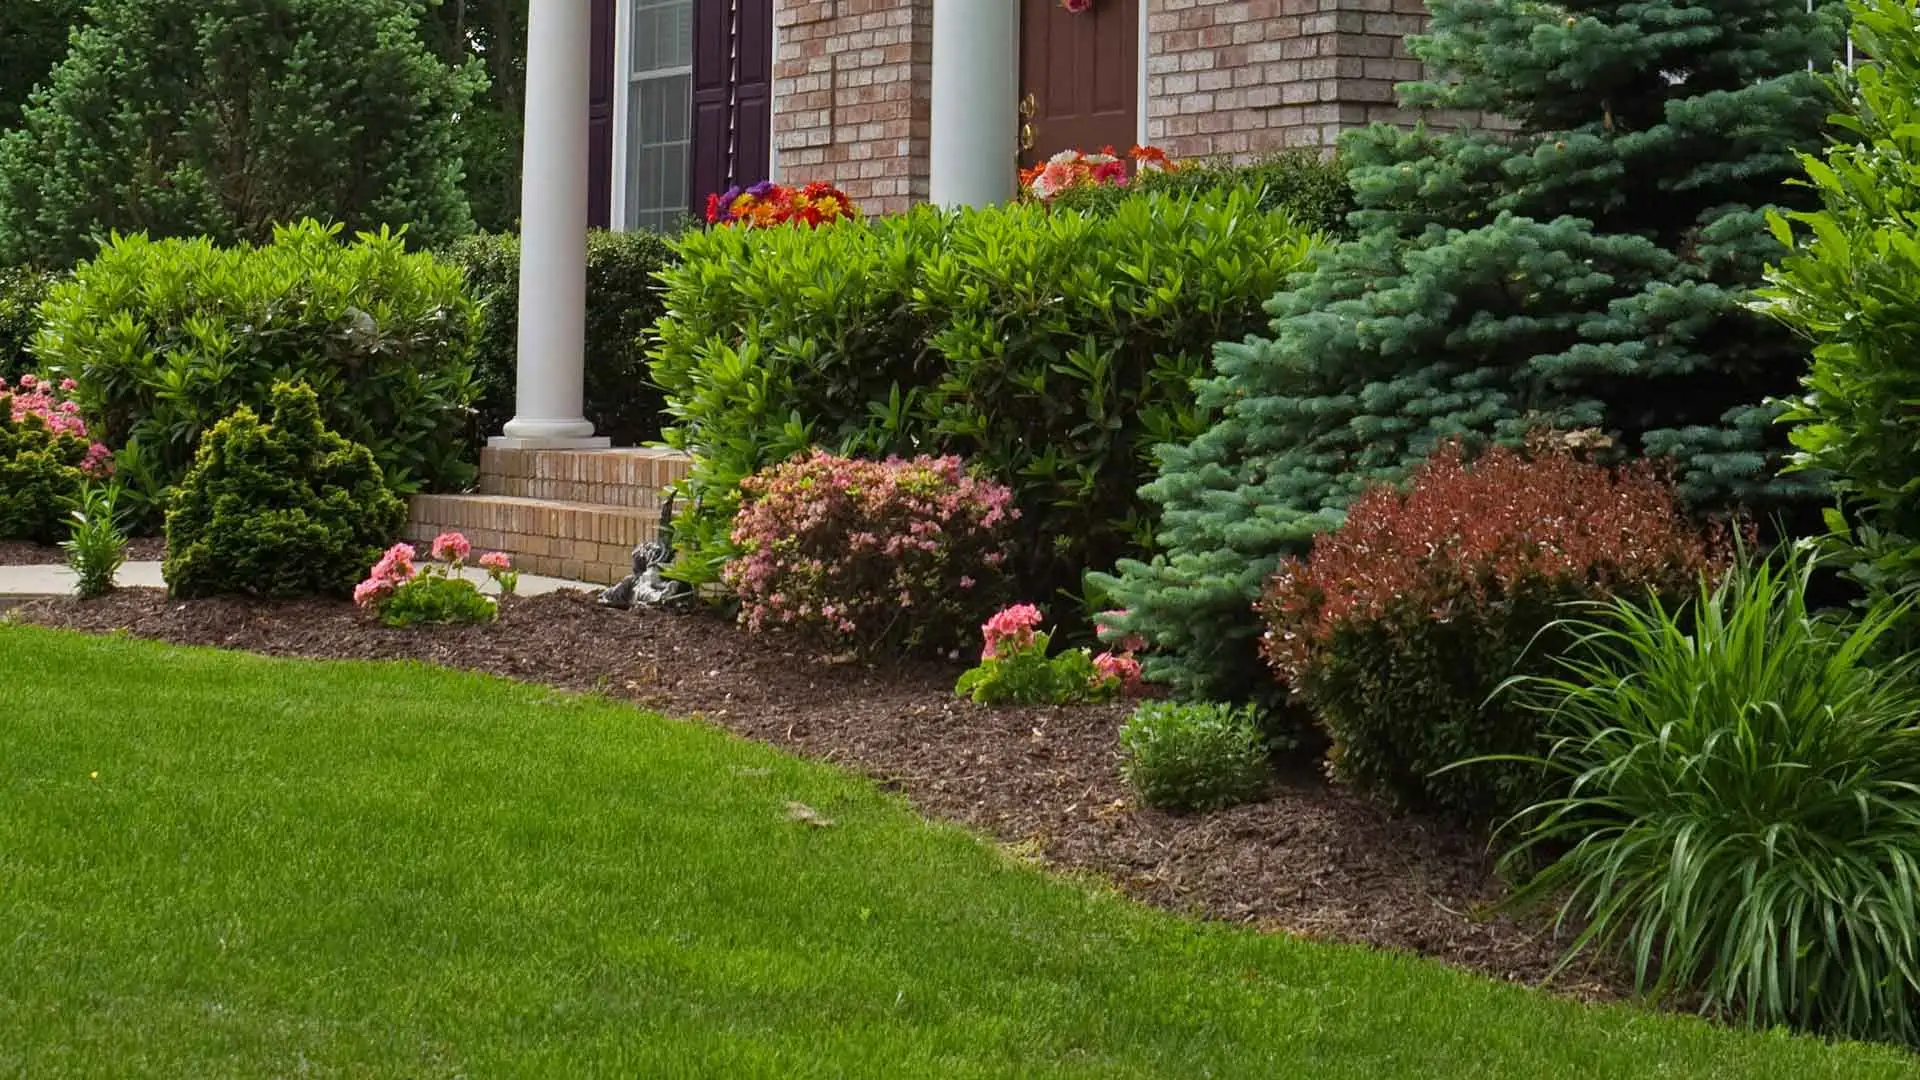 Recently mulched landscaping bed at a home in Westfield, IN.